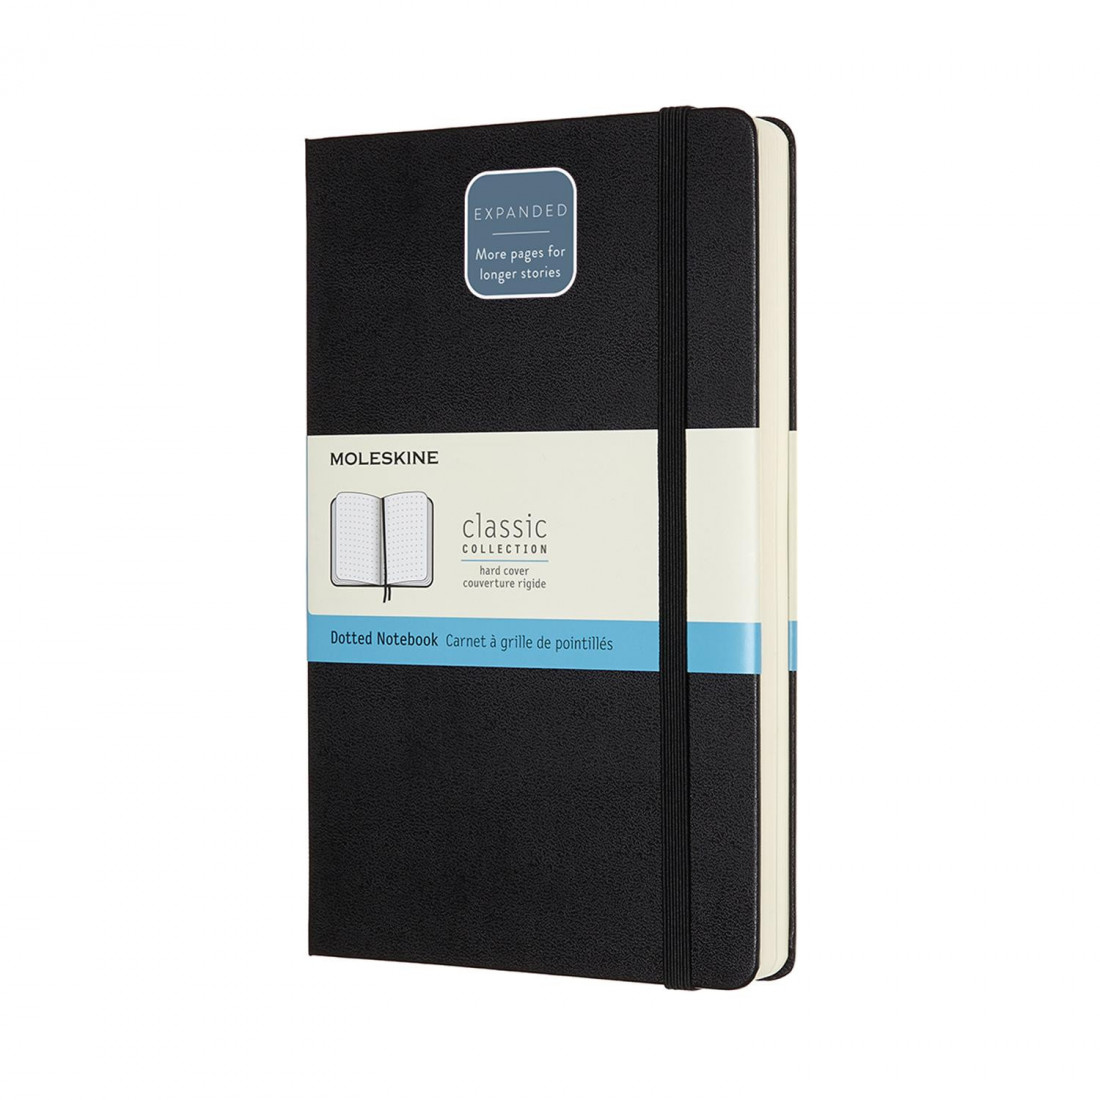 Notebook Large 13x21 Dotted Expanded Version Black Hard Cover Moleskine